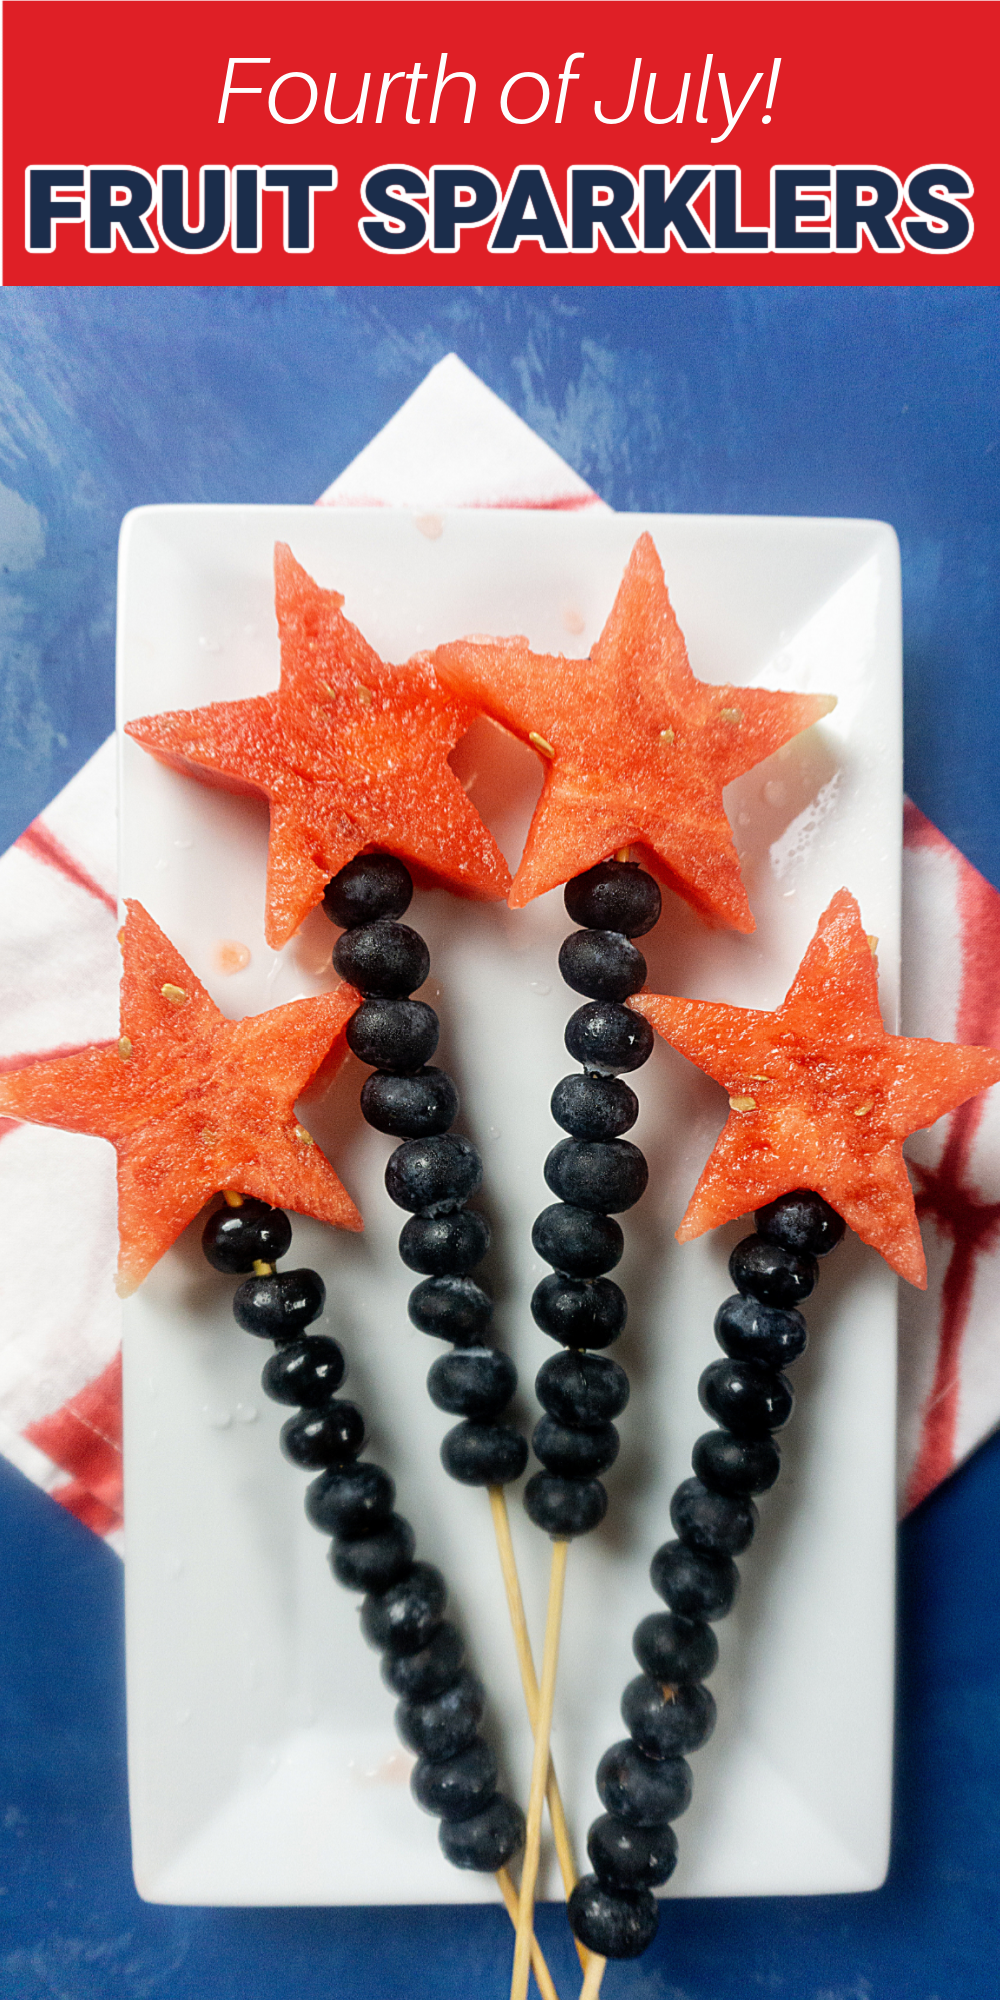 These star spangled fruit sparklers are a great way to offer a special Fourth of July treat without adding unnecessary sugar. Make these Fourth of July fruit sparklers with just watermelon, blueberries, and skewers!